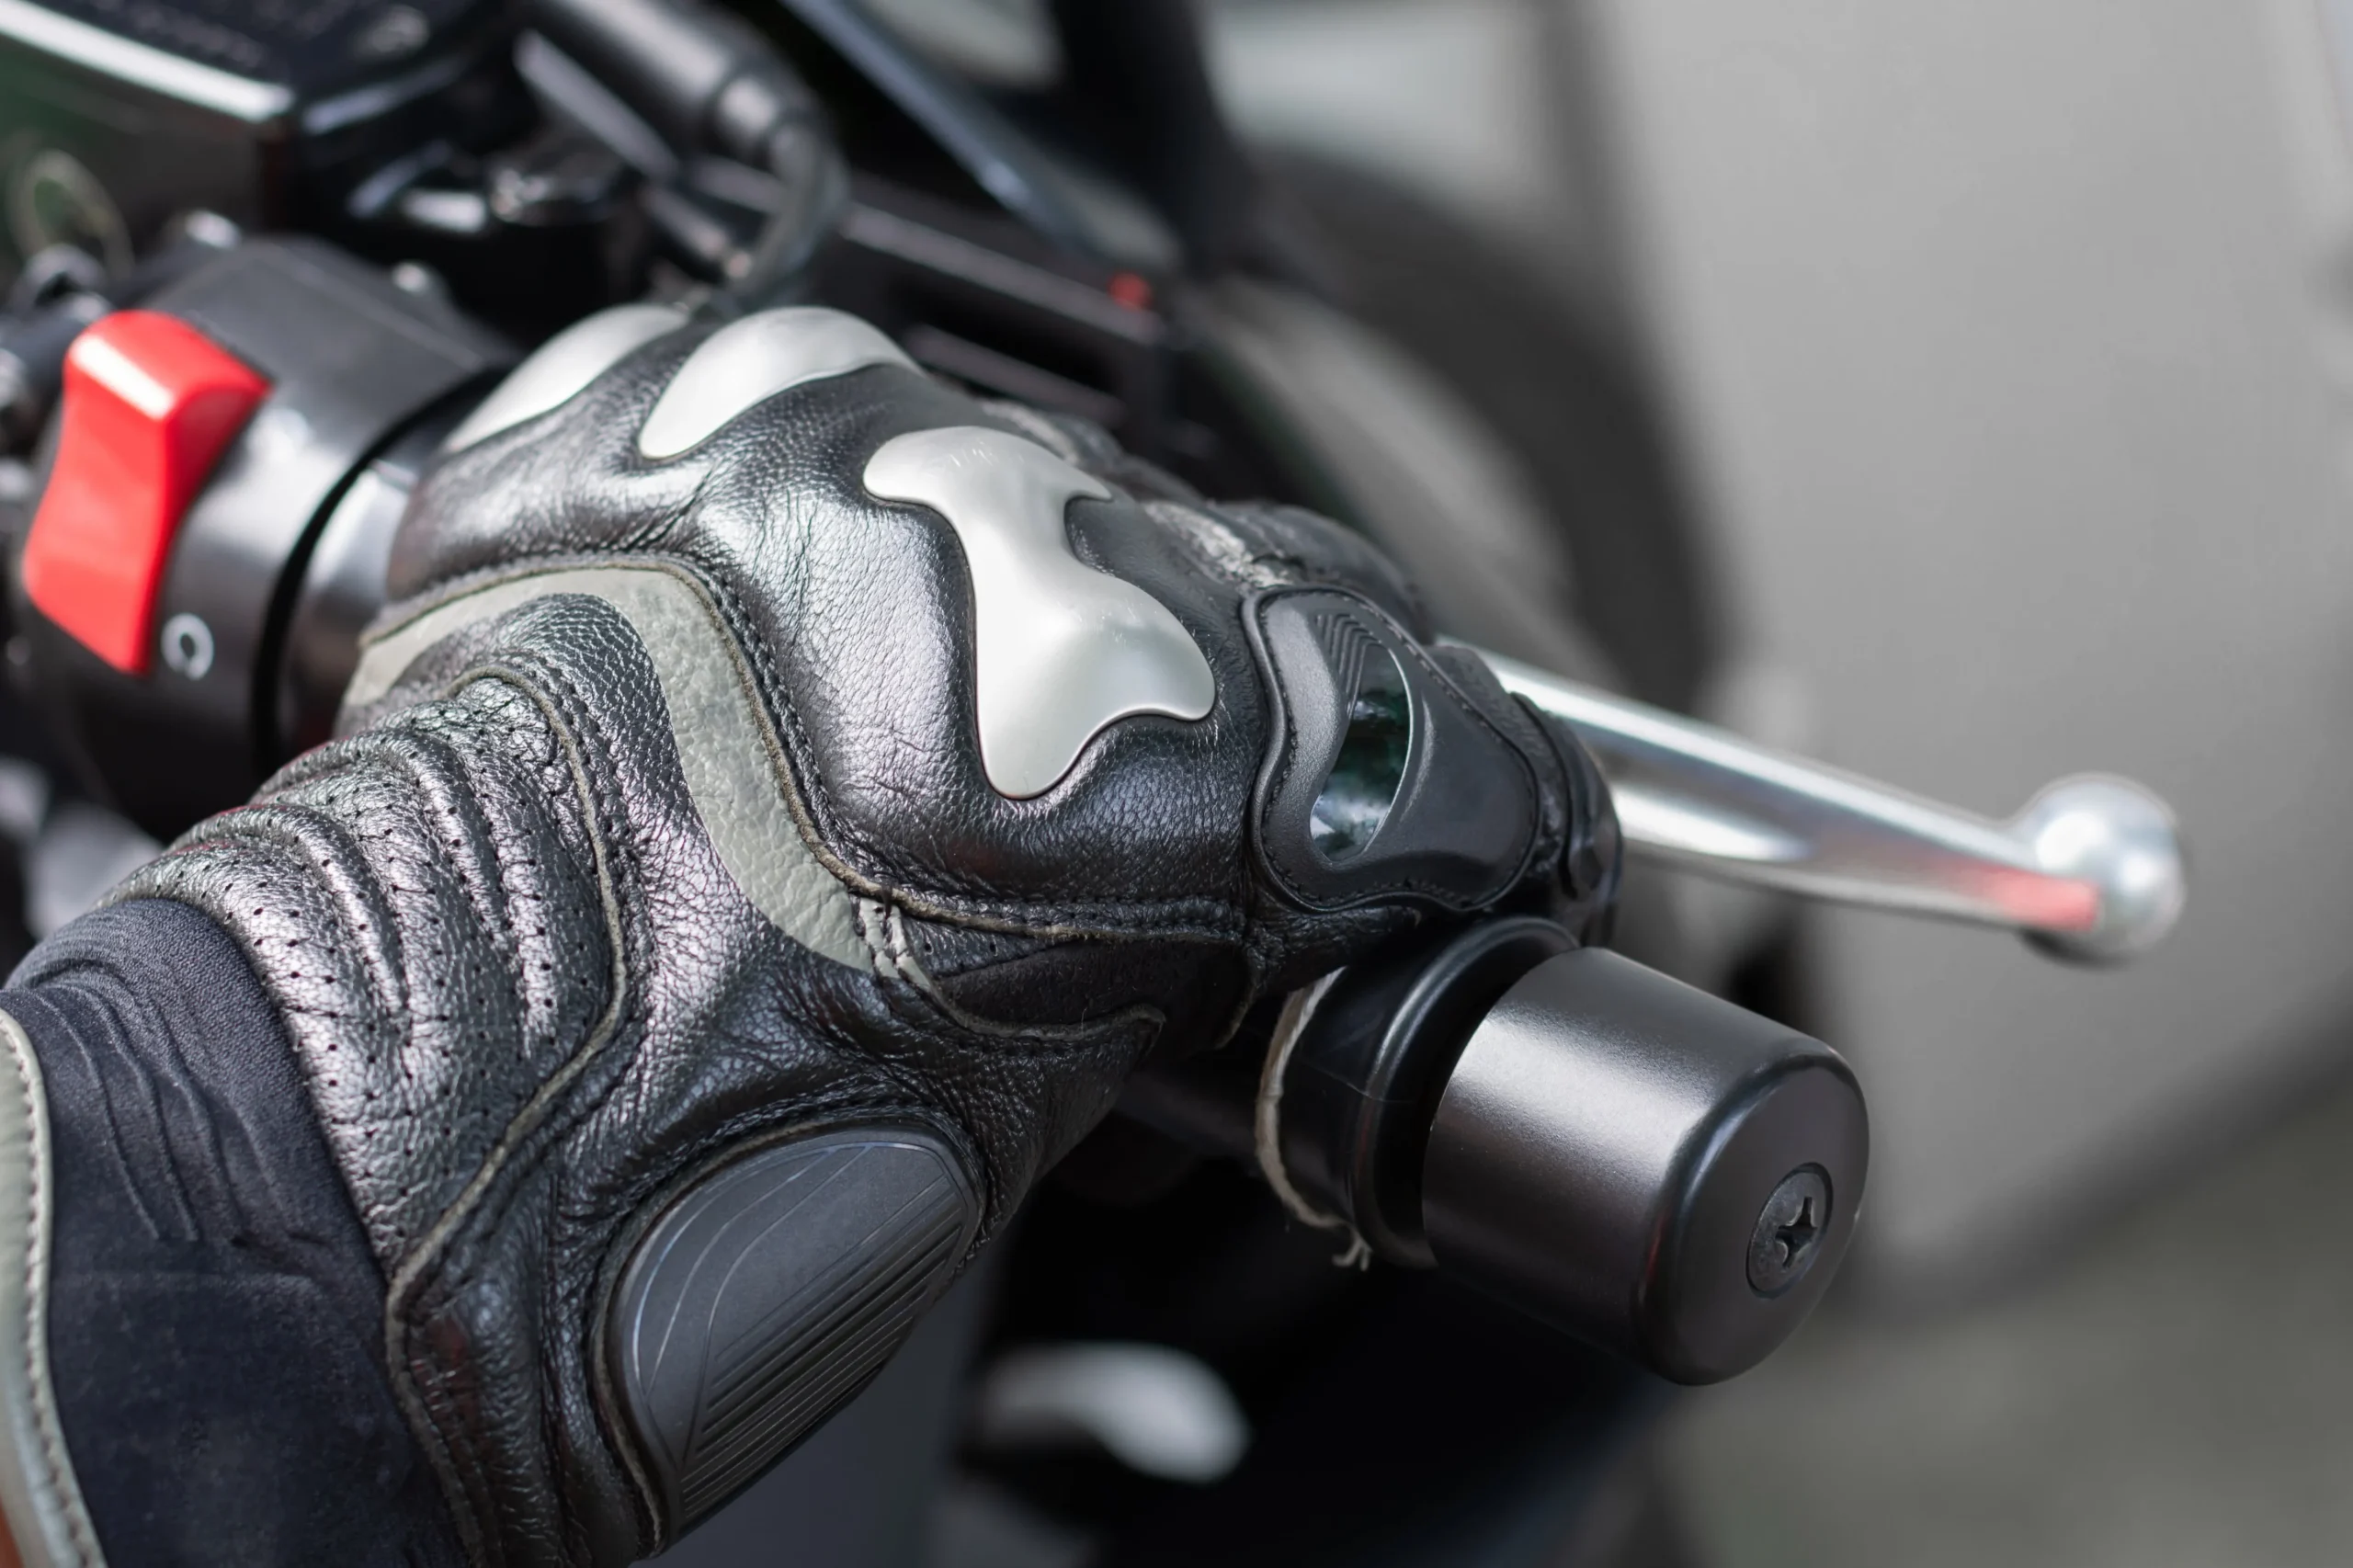 A motorcyclist's hand on the handlebar of his bike.